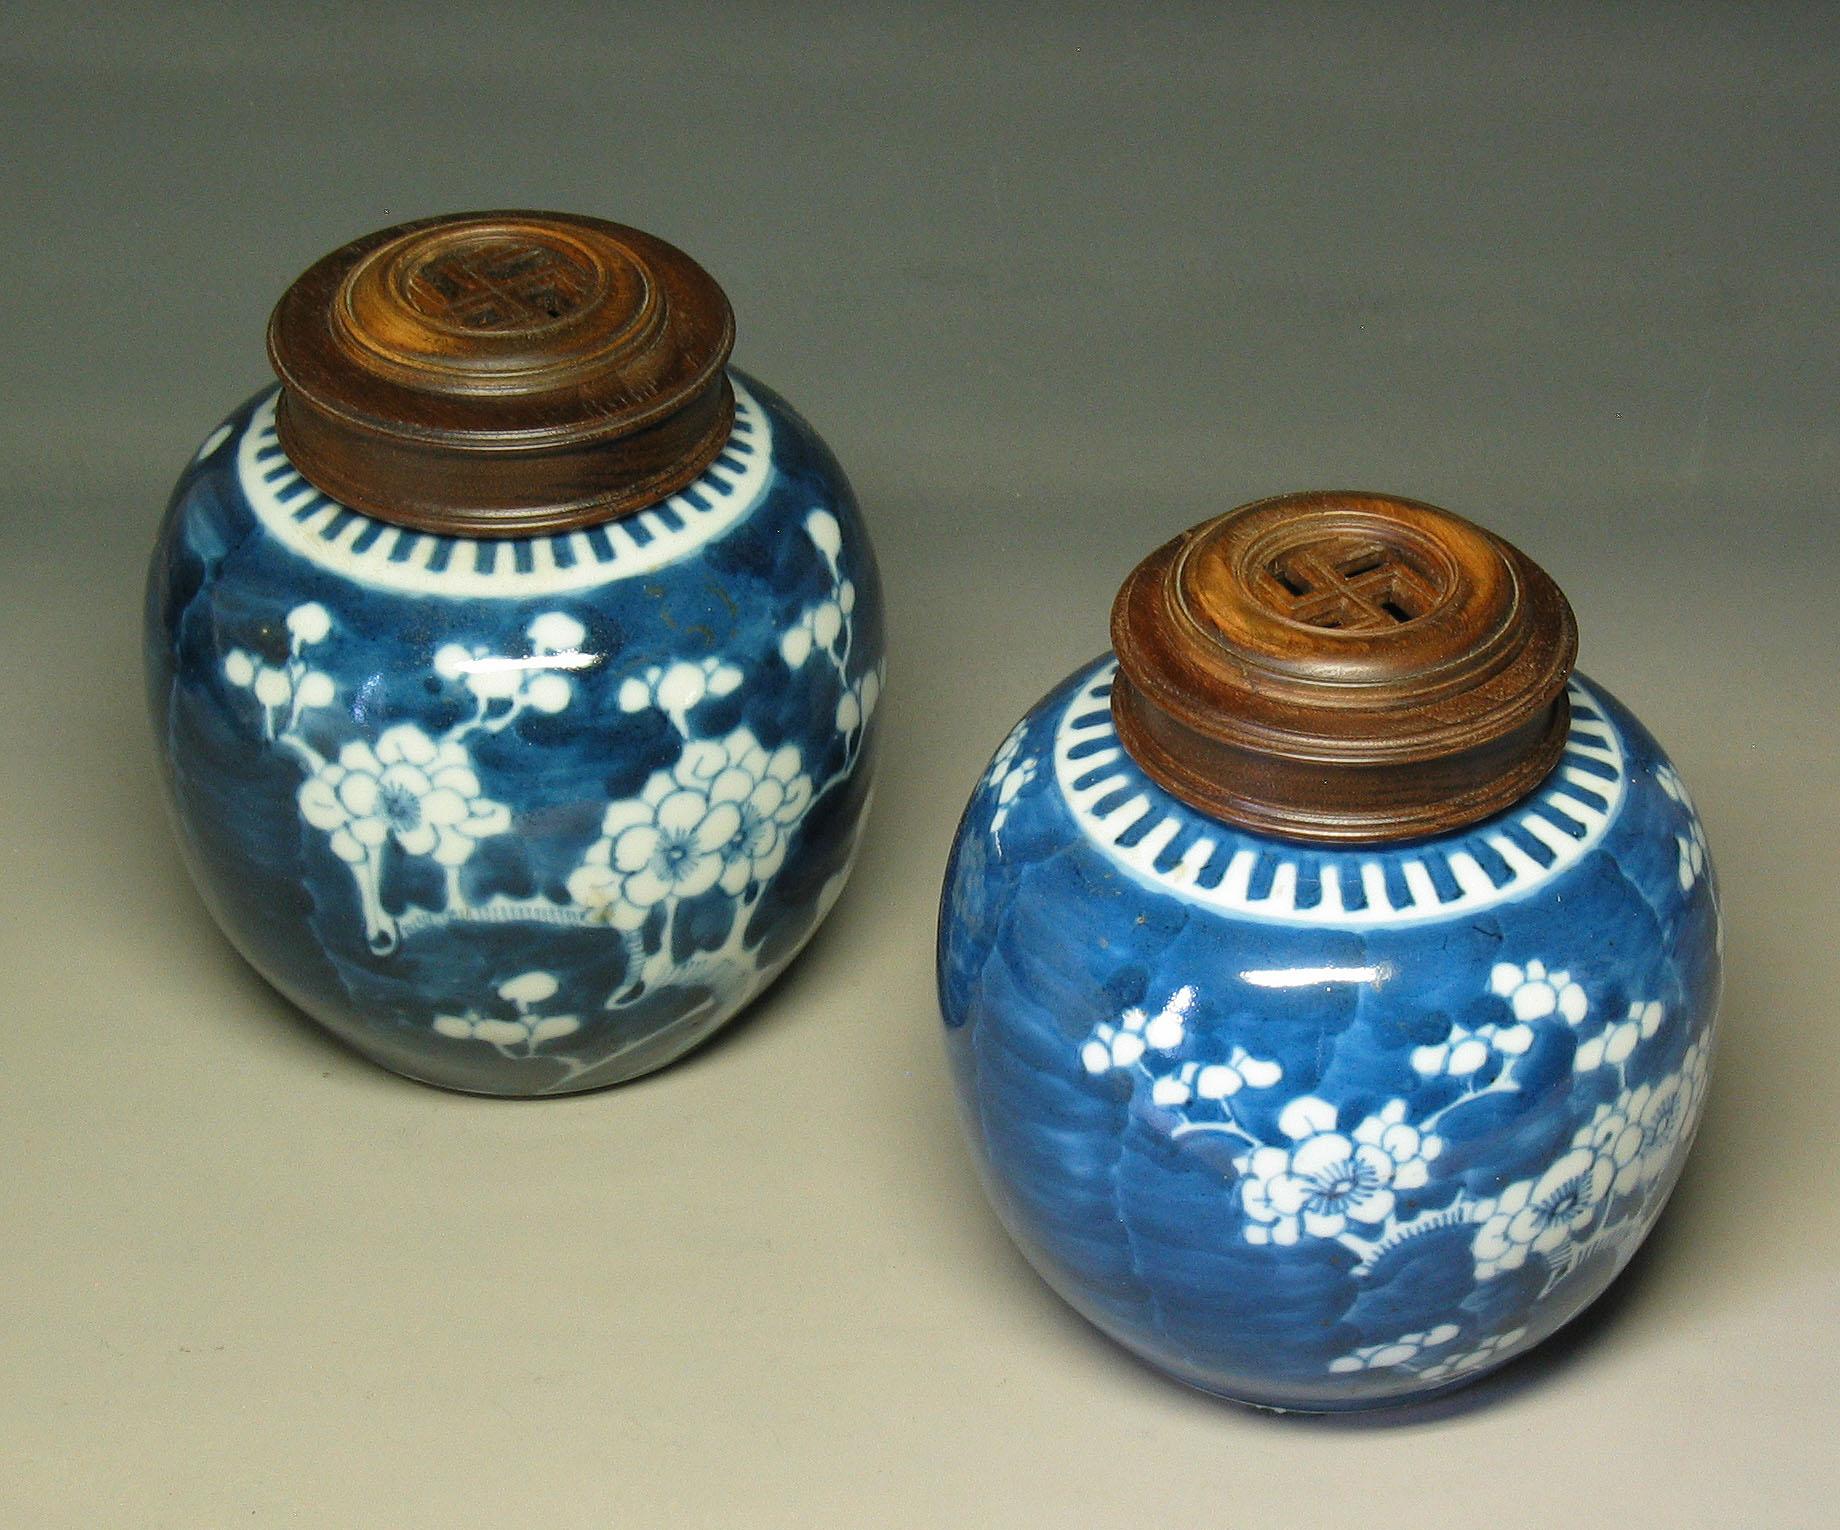 Chinese Export Two Chinese Blue and White Prunus Globular Jars Late Qing Dynasty